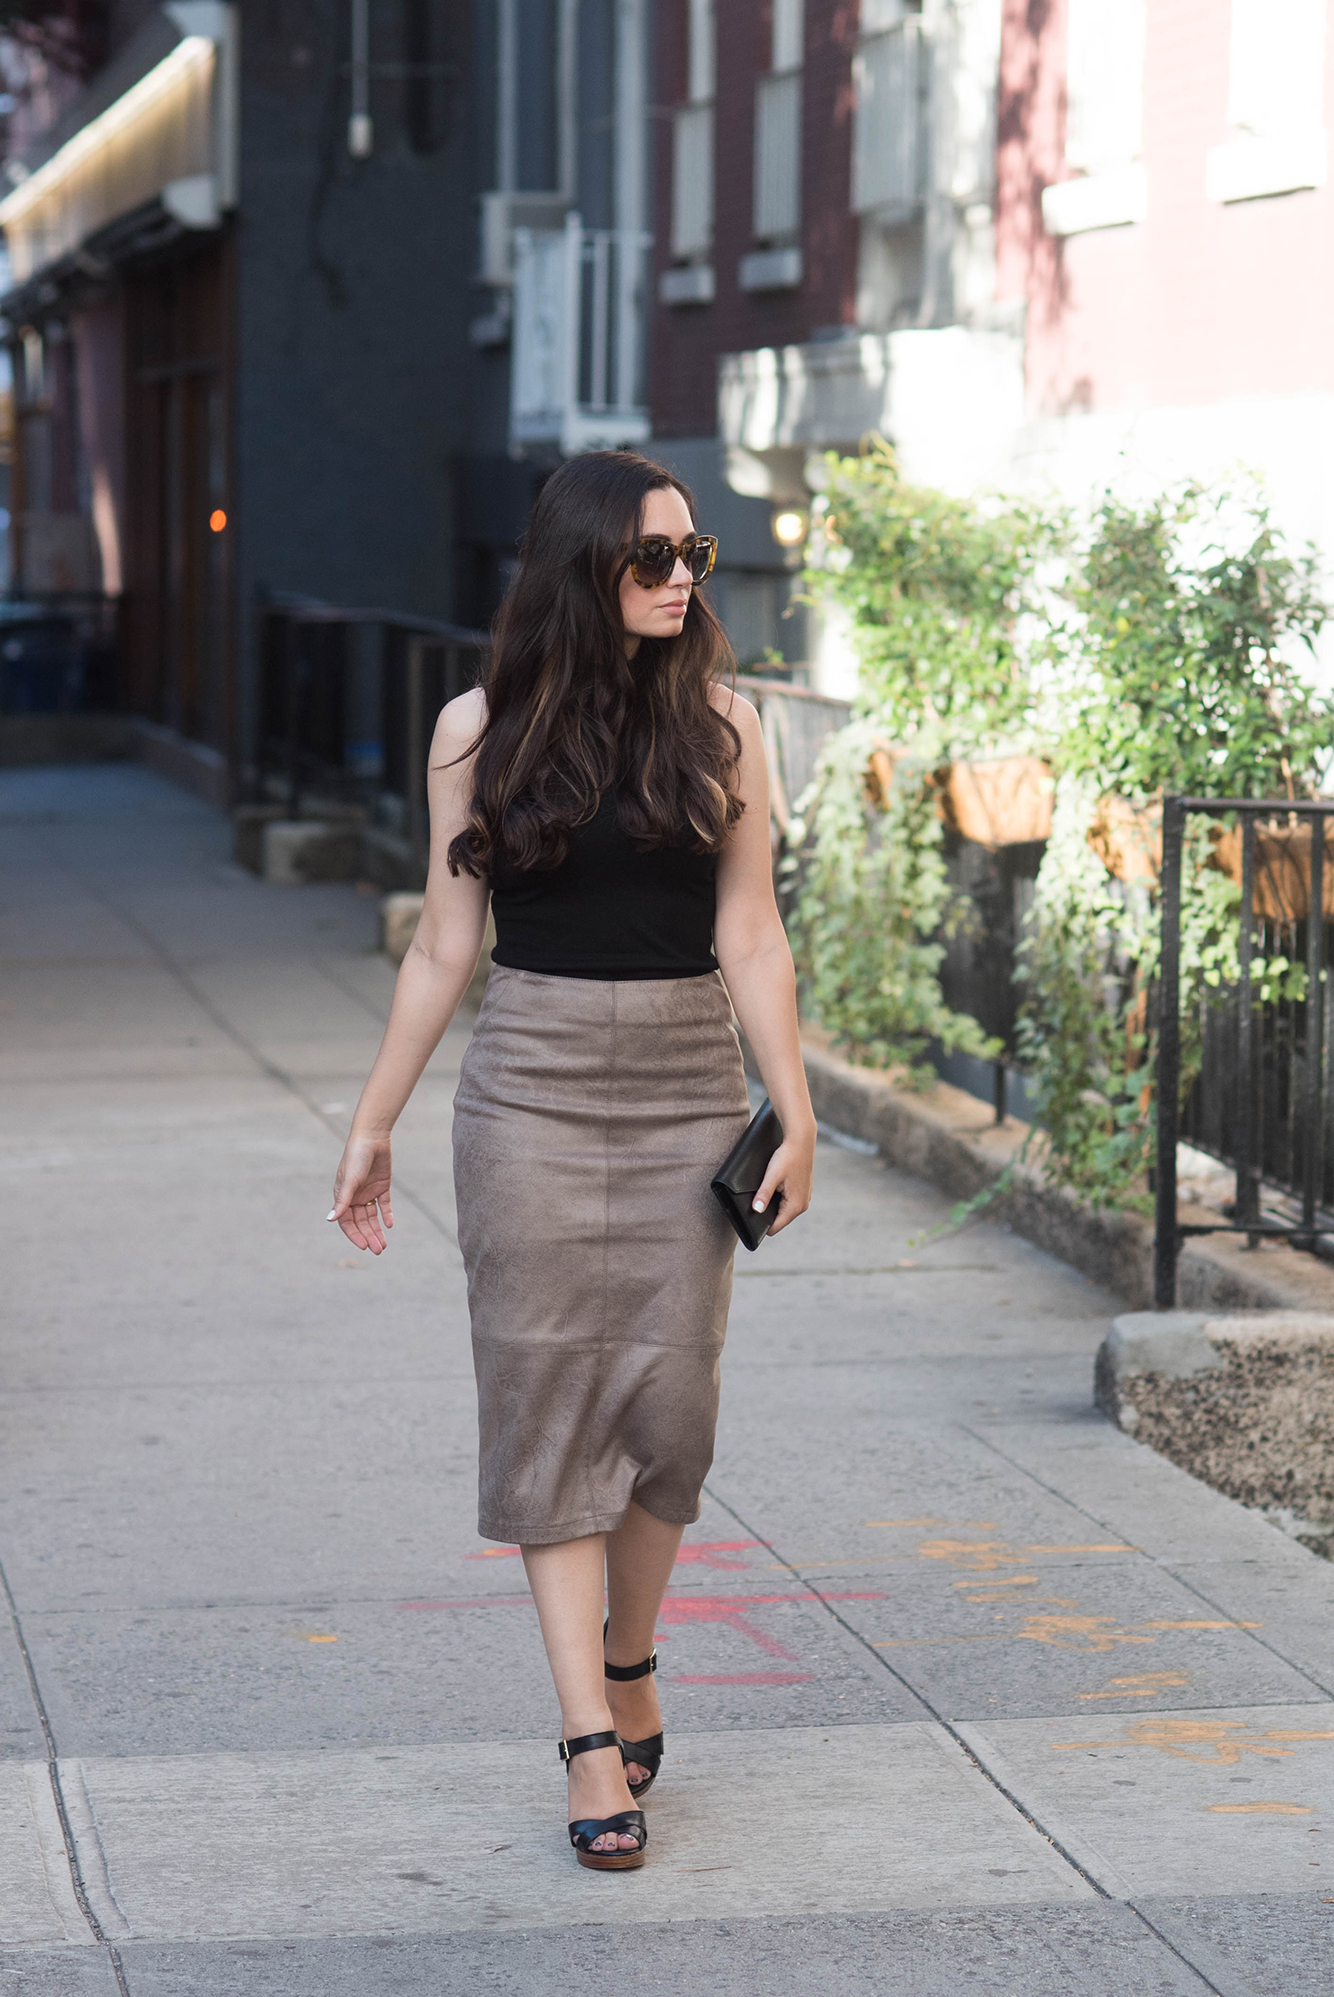 coco-and-vera-best-vancouver-style-blog-best-canadian-style-blog-top-blogger-street-style-le-chateau-top-suede-skirt-anine-bing-sunglasses-platform-sandals-chloe-and-neely-clutch